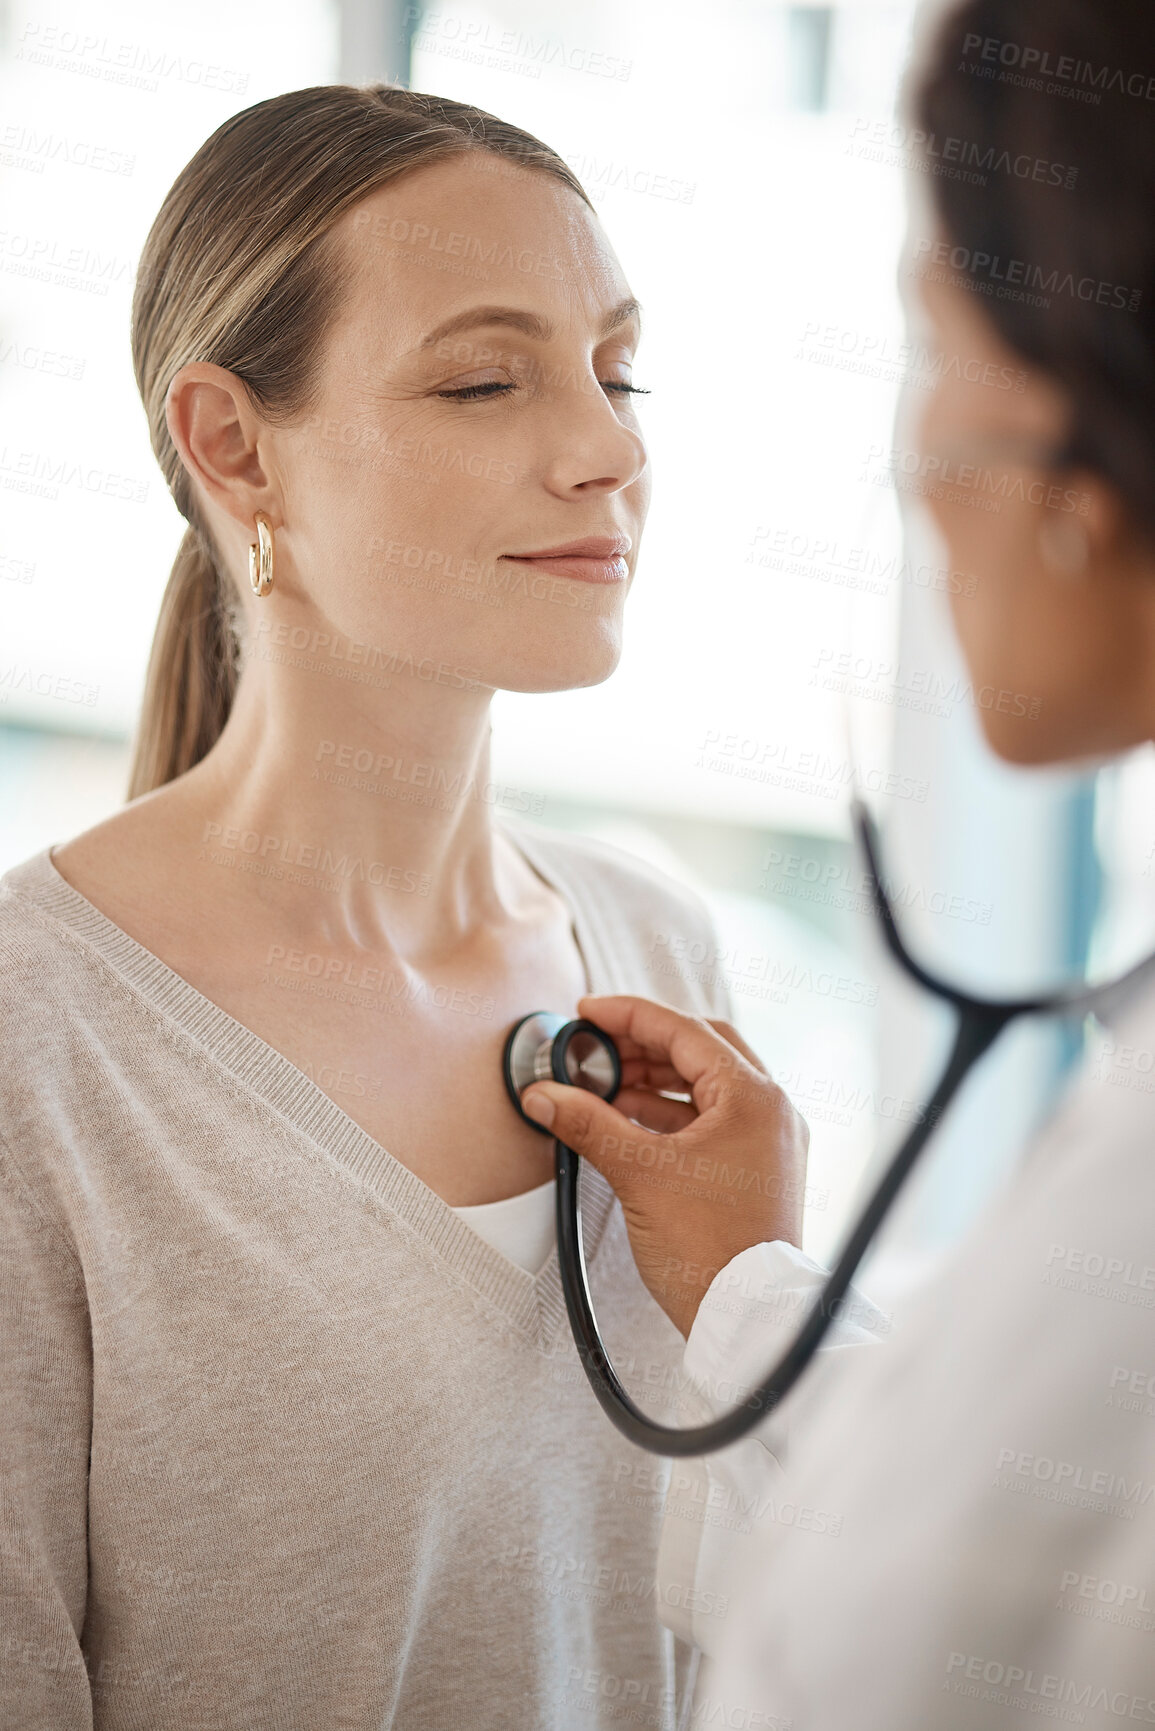 Buy stock photo Checking and hearing heart rate with a working doctor consulting the wellness and health of a woman. Clinic checkup with a medical professional and patient at a healthcare center or hospital